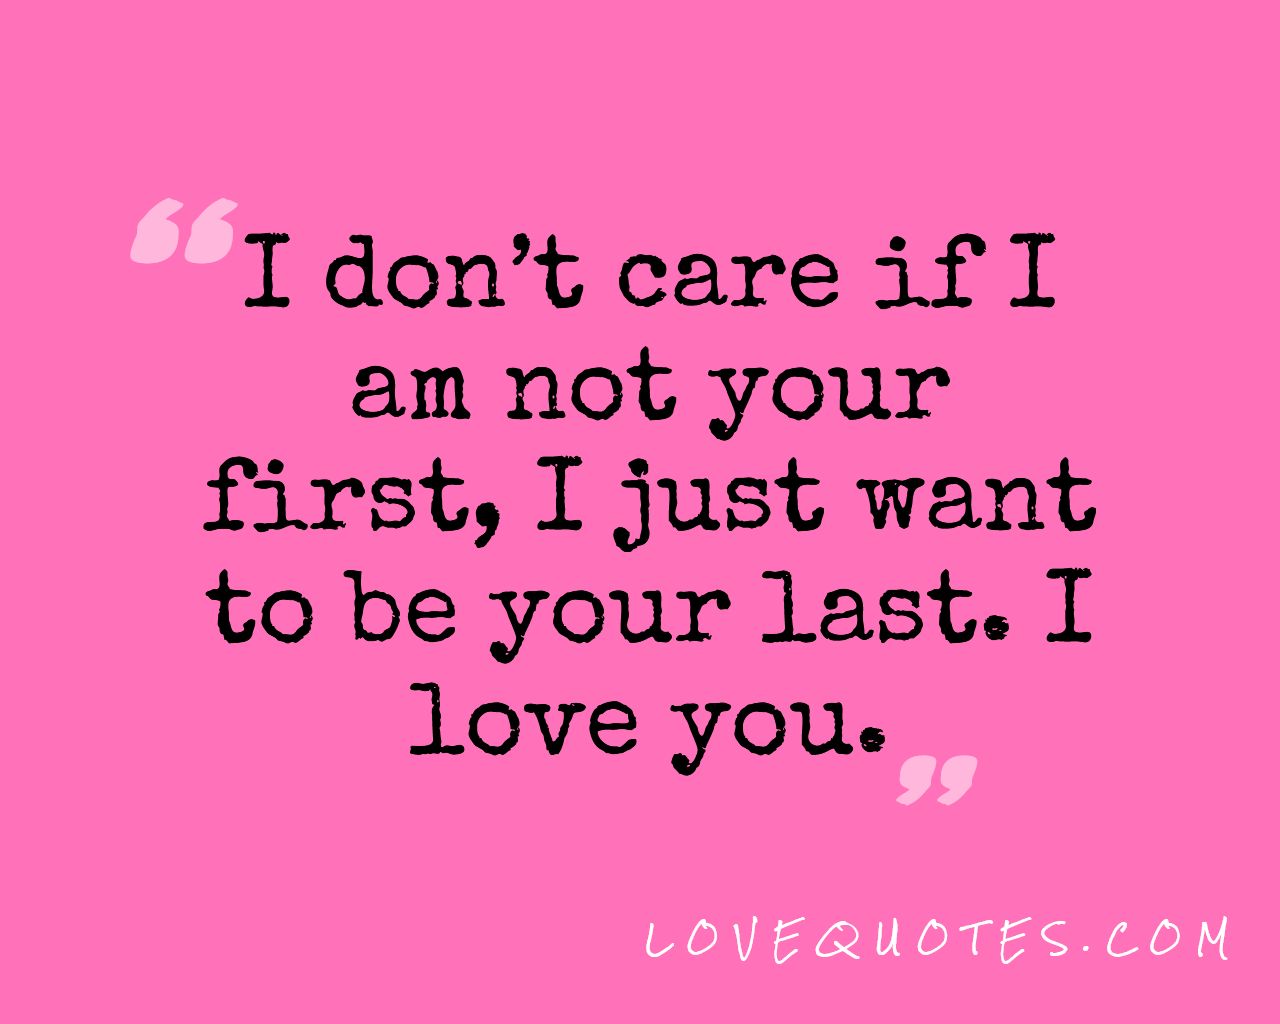 Your Last - Love Quotes